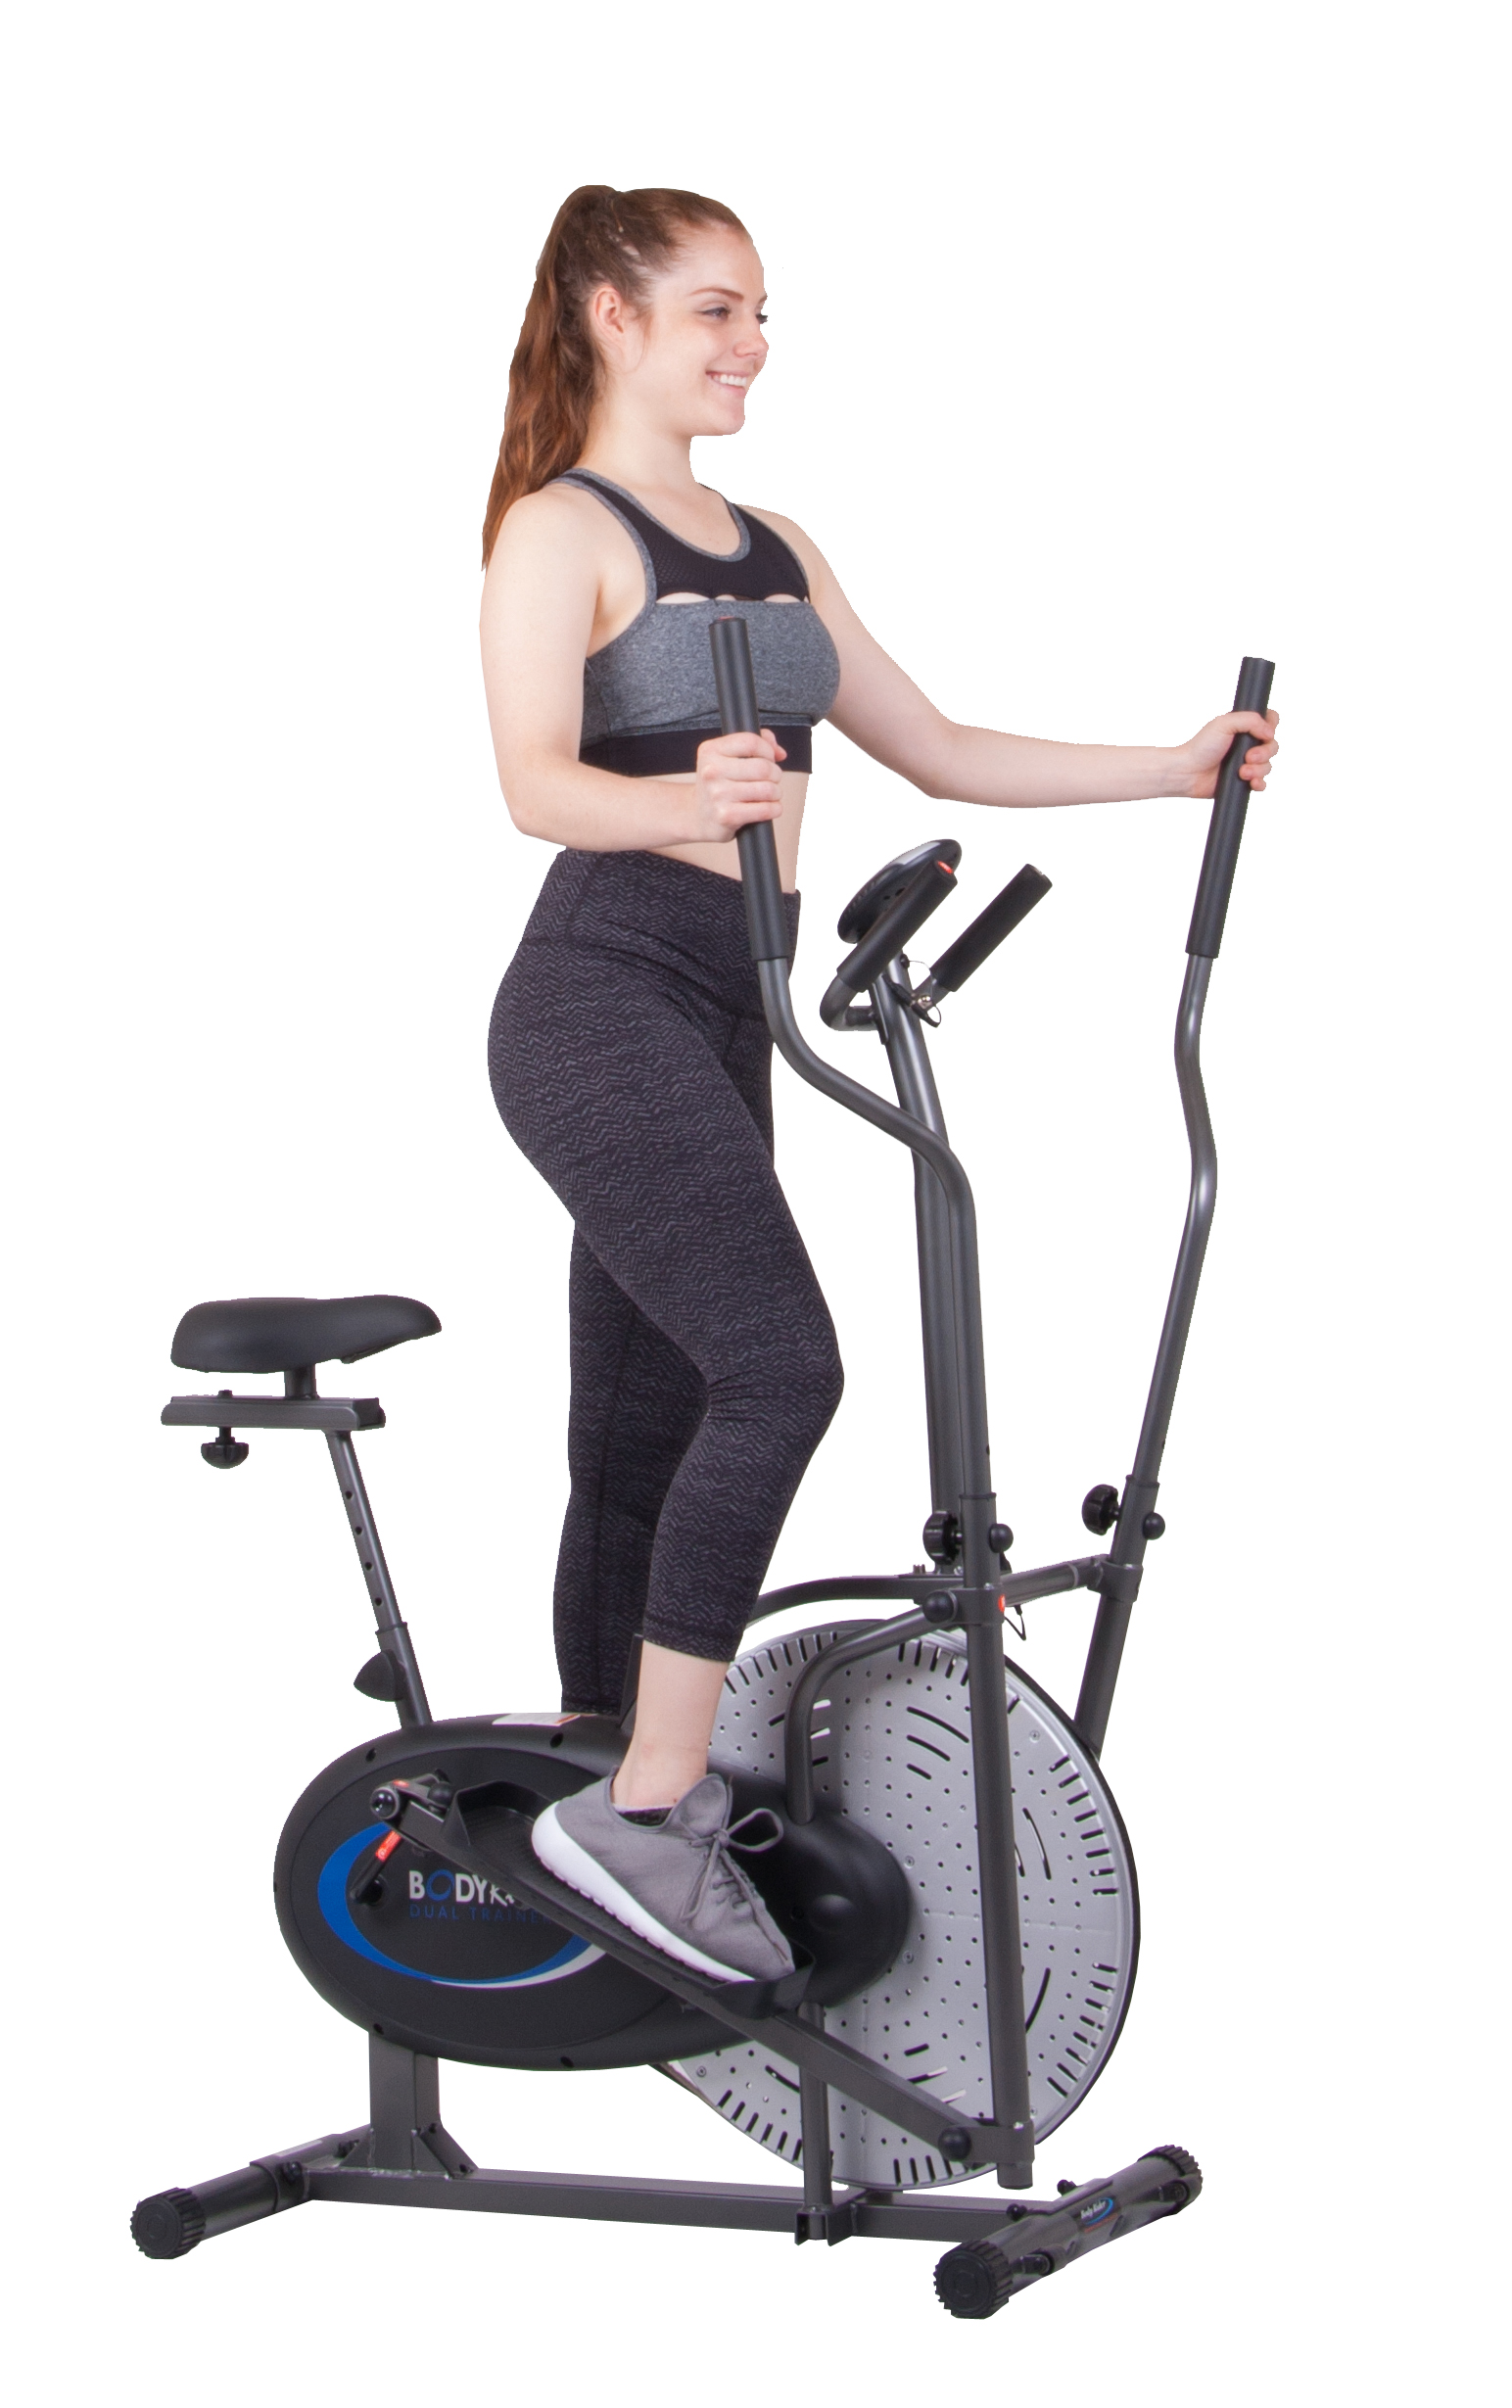 Elliptical Trainer Exercise Bike with Seat Easy Computer Office Fitness Workout Machine for Home Use